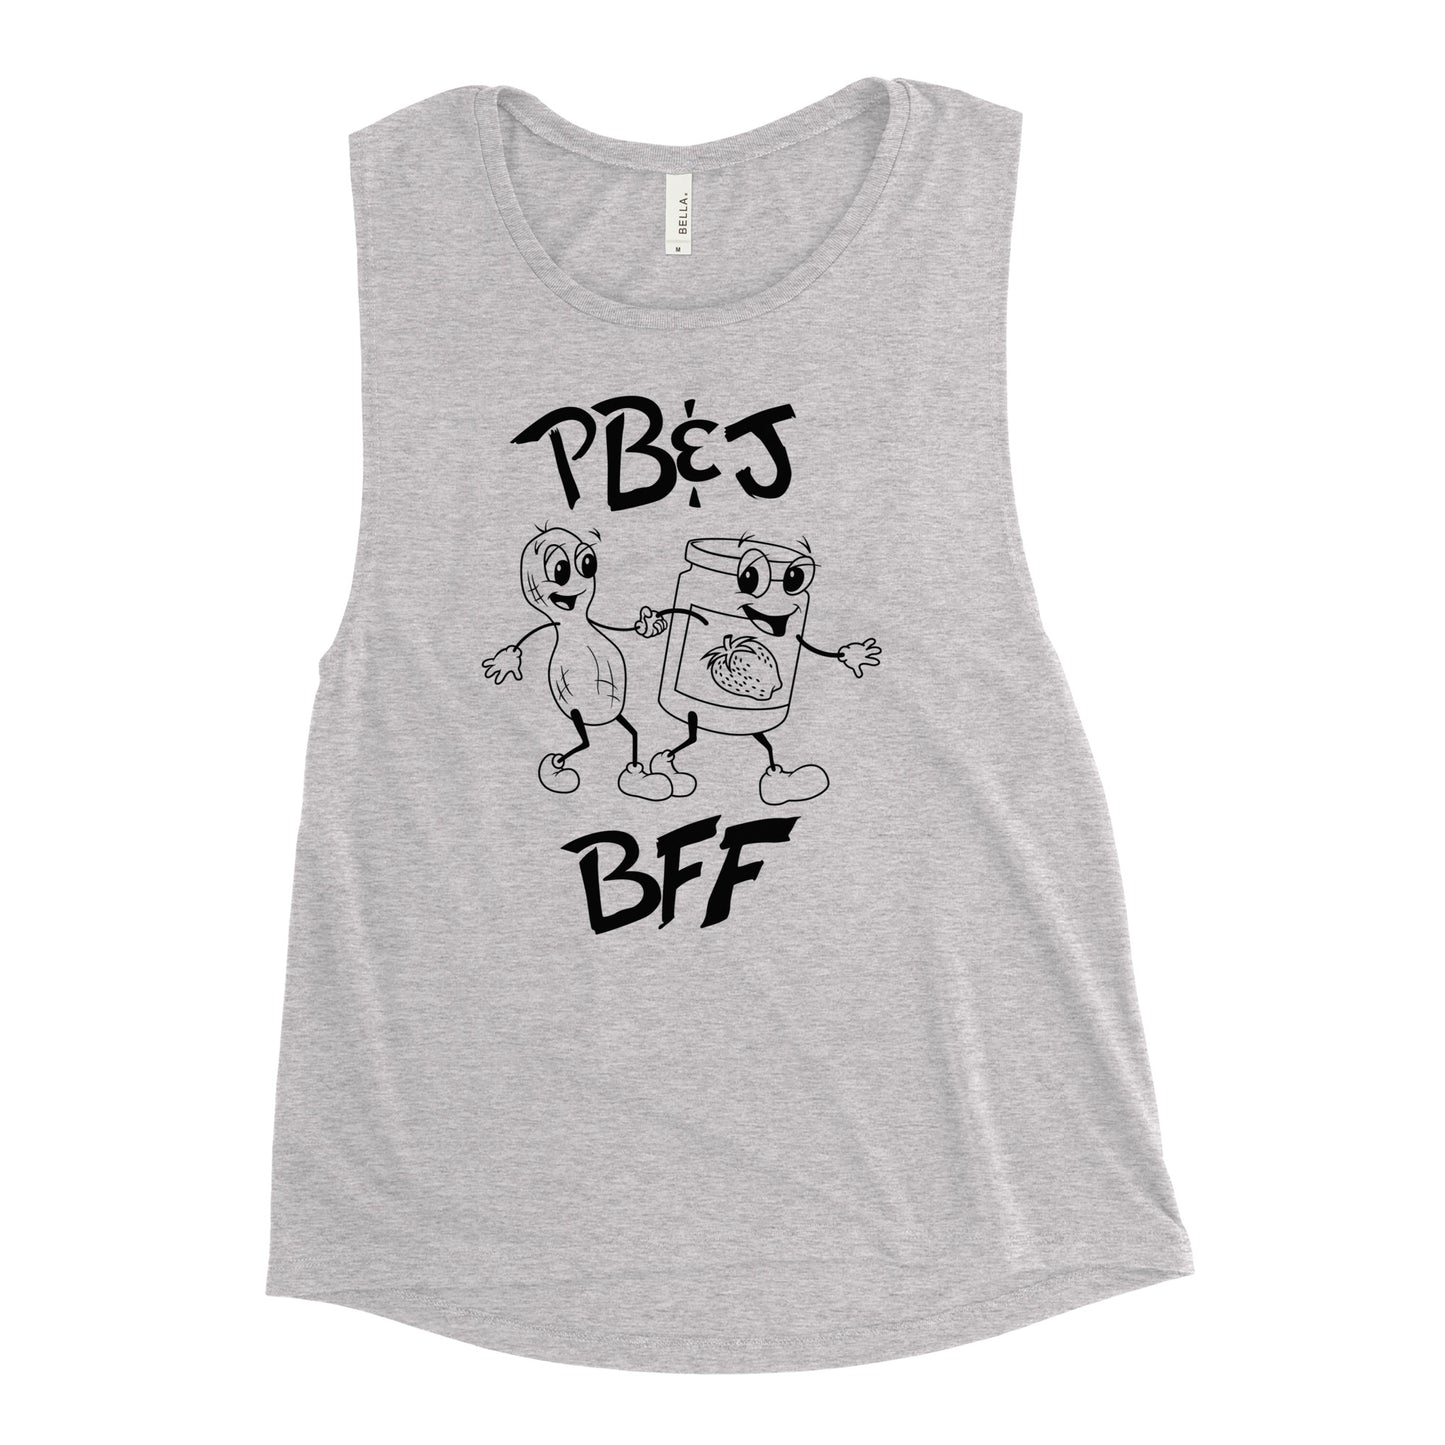 Peanut Butter And Jelly - BFF Women's Muscle Tank